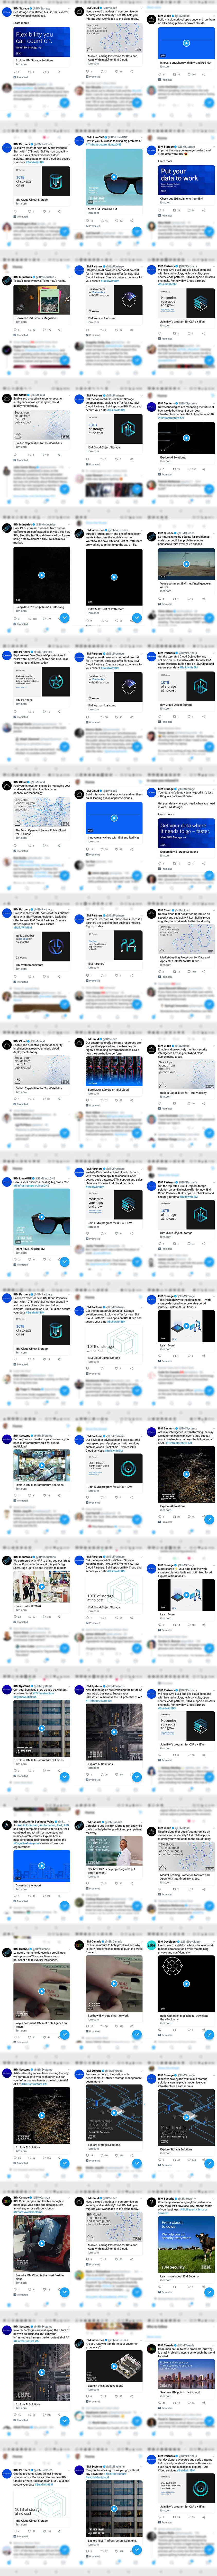 Part one, a collage of 60 Twitter ads for IBM, with titles like “Get storage with stretch built in, that evolves with your business needs” or “Let IBM help you migrate your workloads to the cloud today”, or “Exclusive offer for new IBM Cloud Partners”.